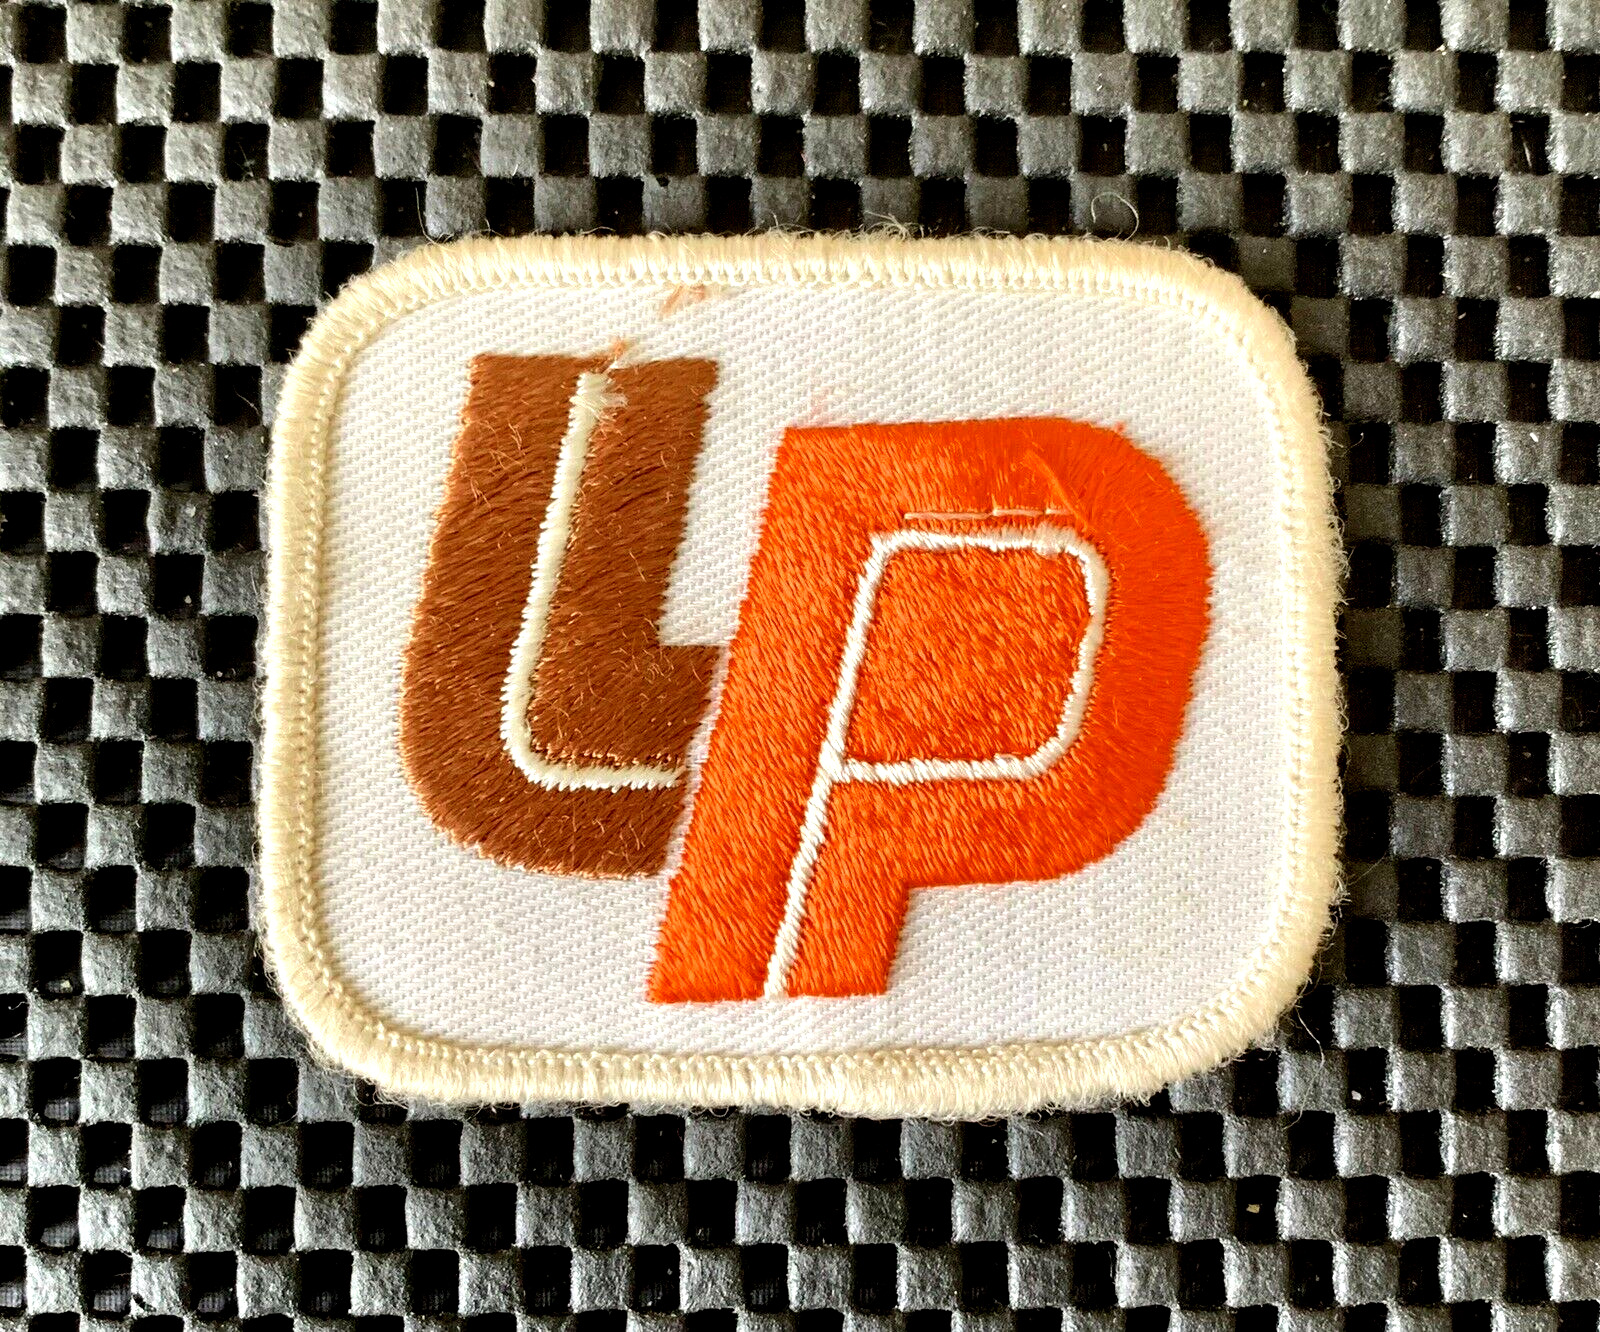 LP BUILDING PRODUCTS EMBROIDERED SEW ON PATCH BINGHAMTON NY 3